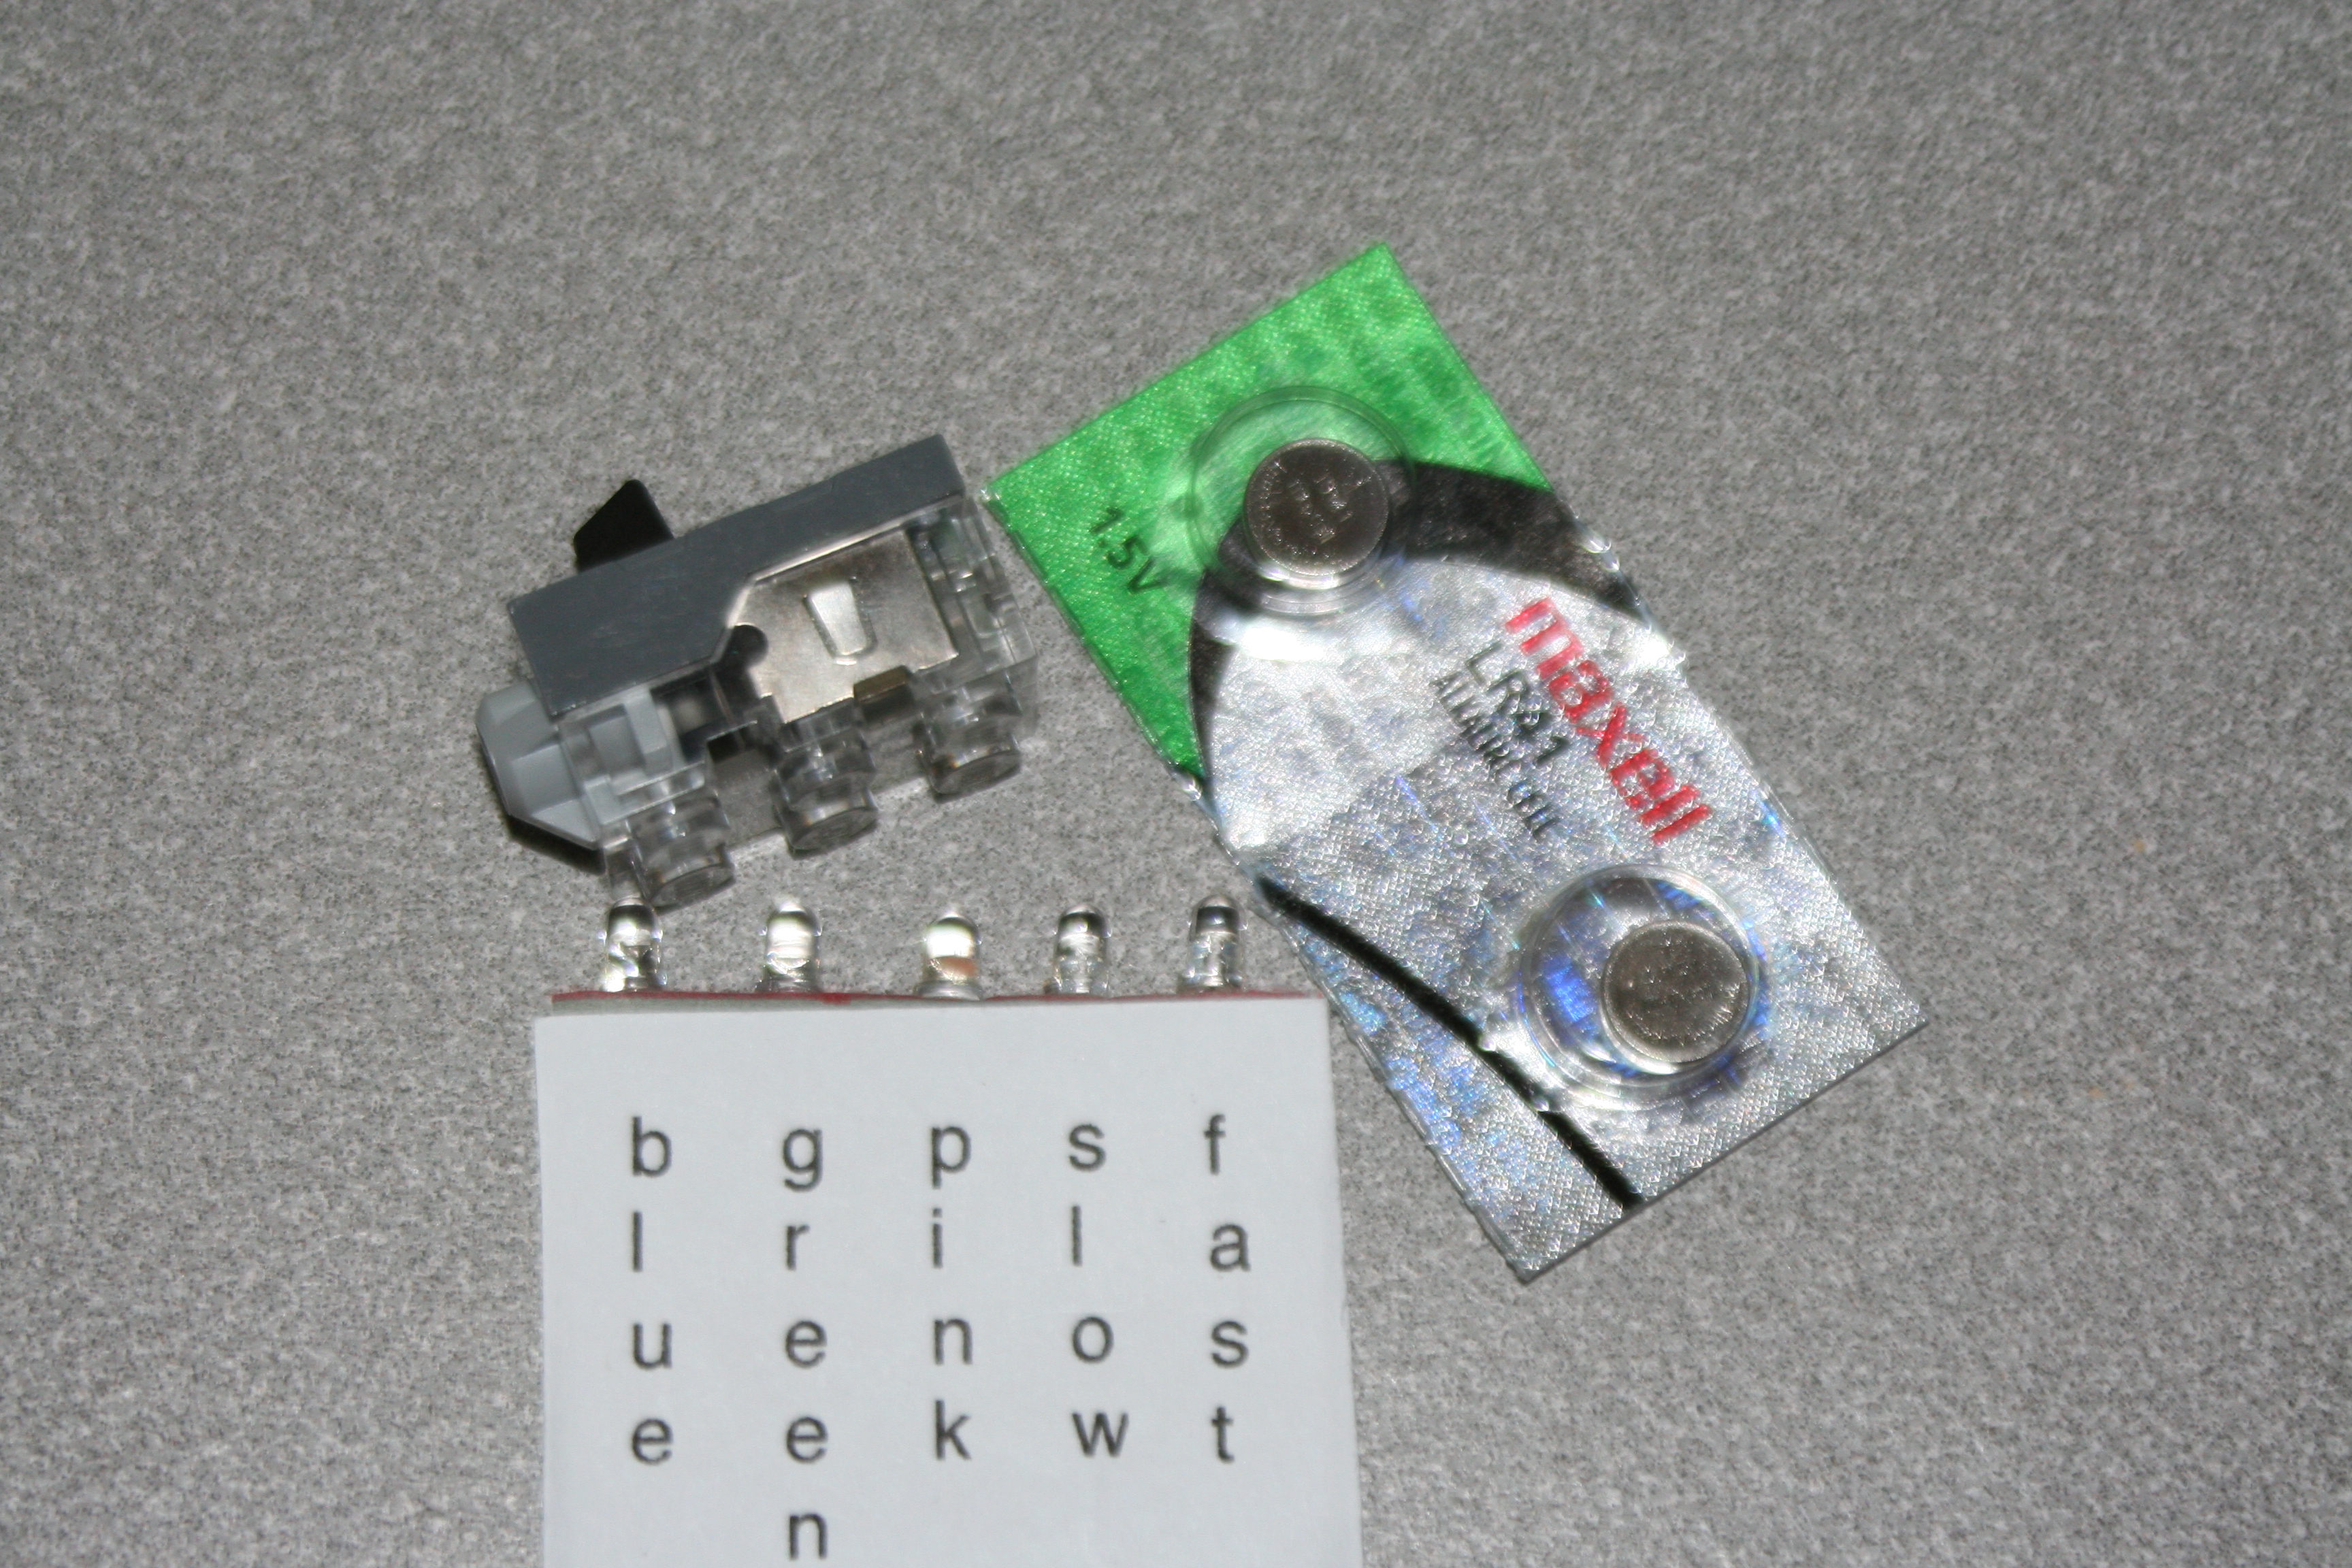 Items are shown for the parts kit to match LEGO Optics, Chapter 2.